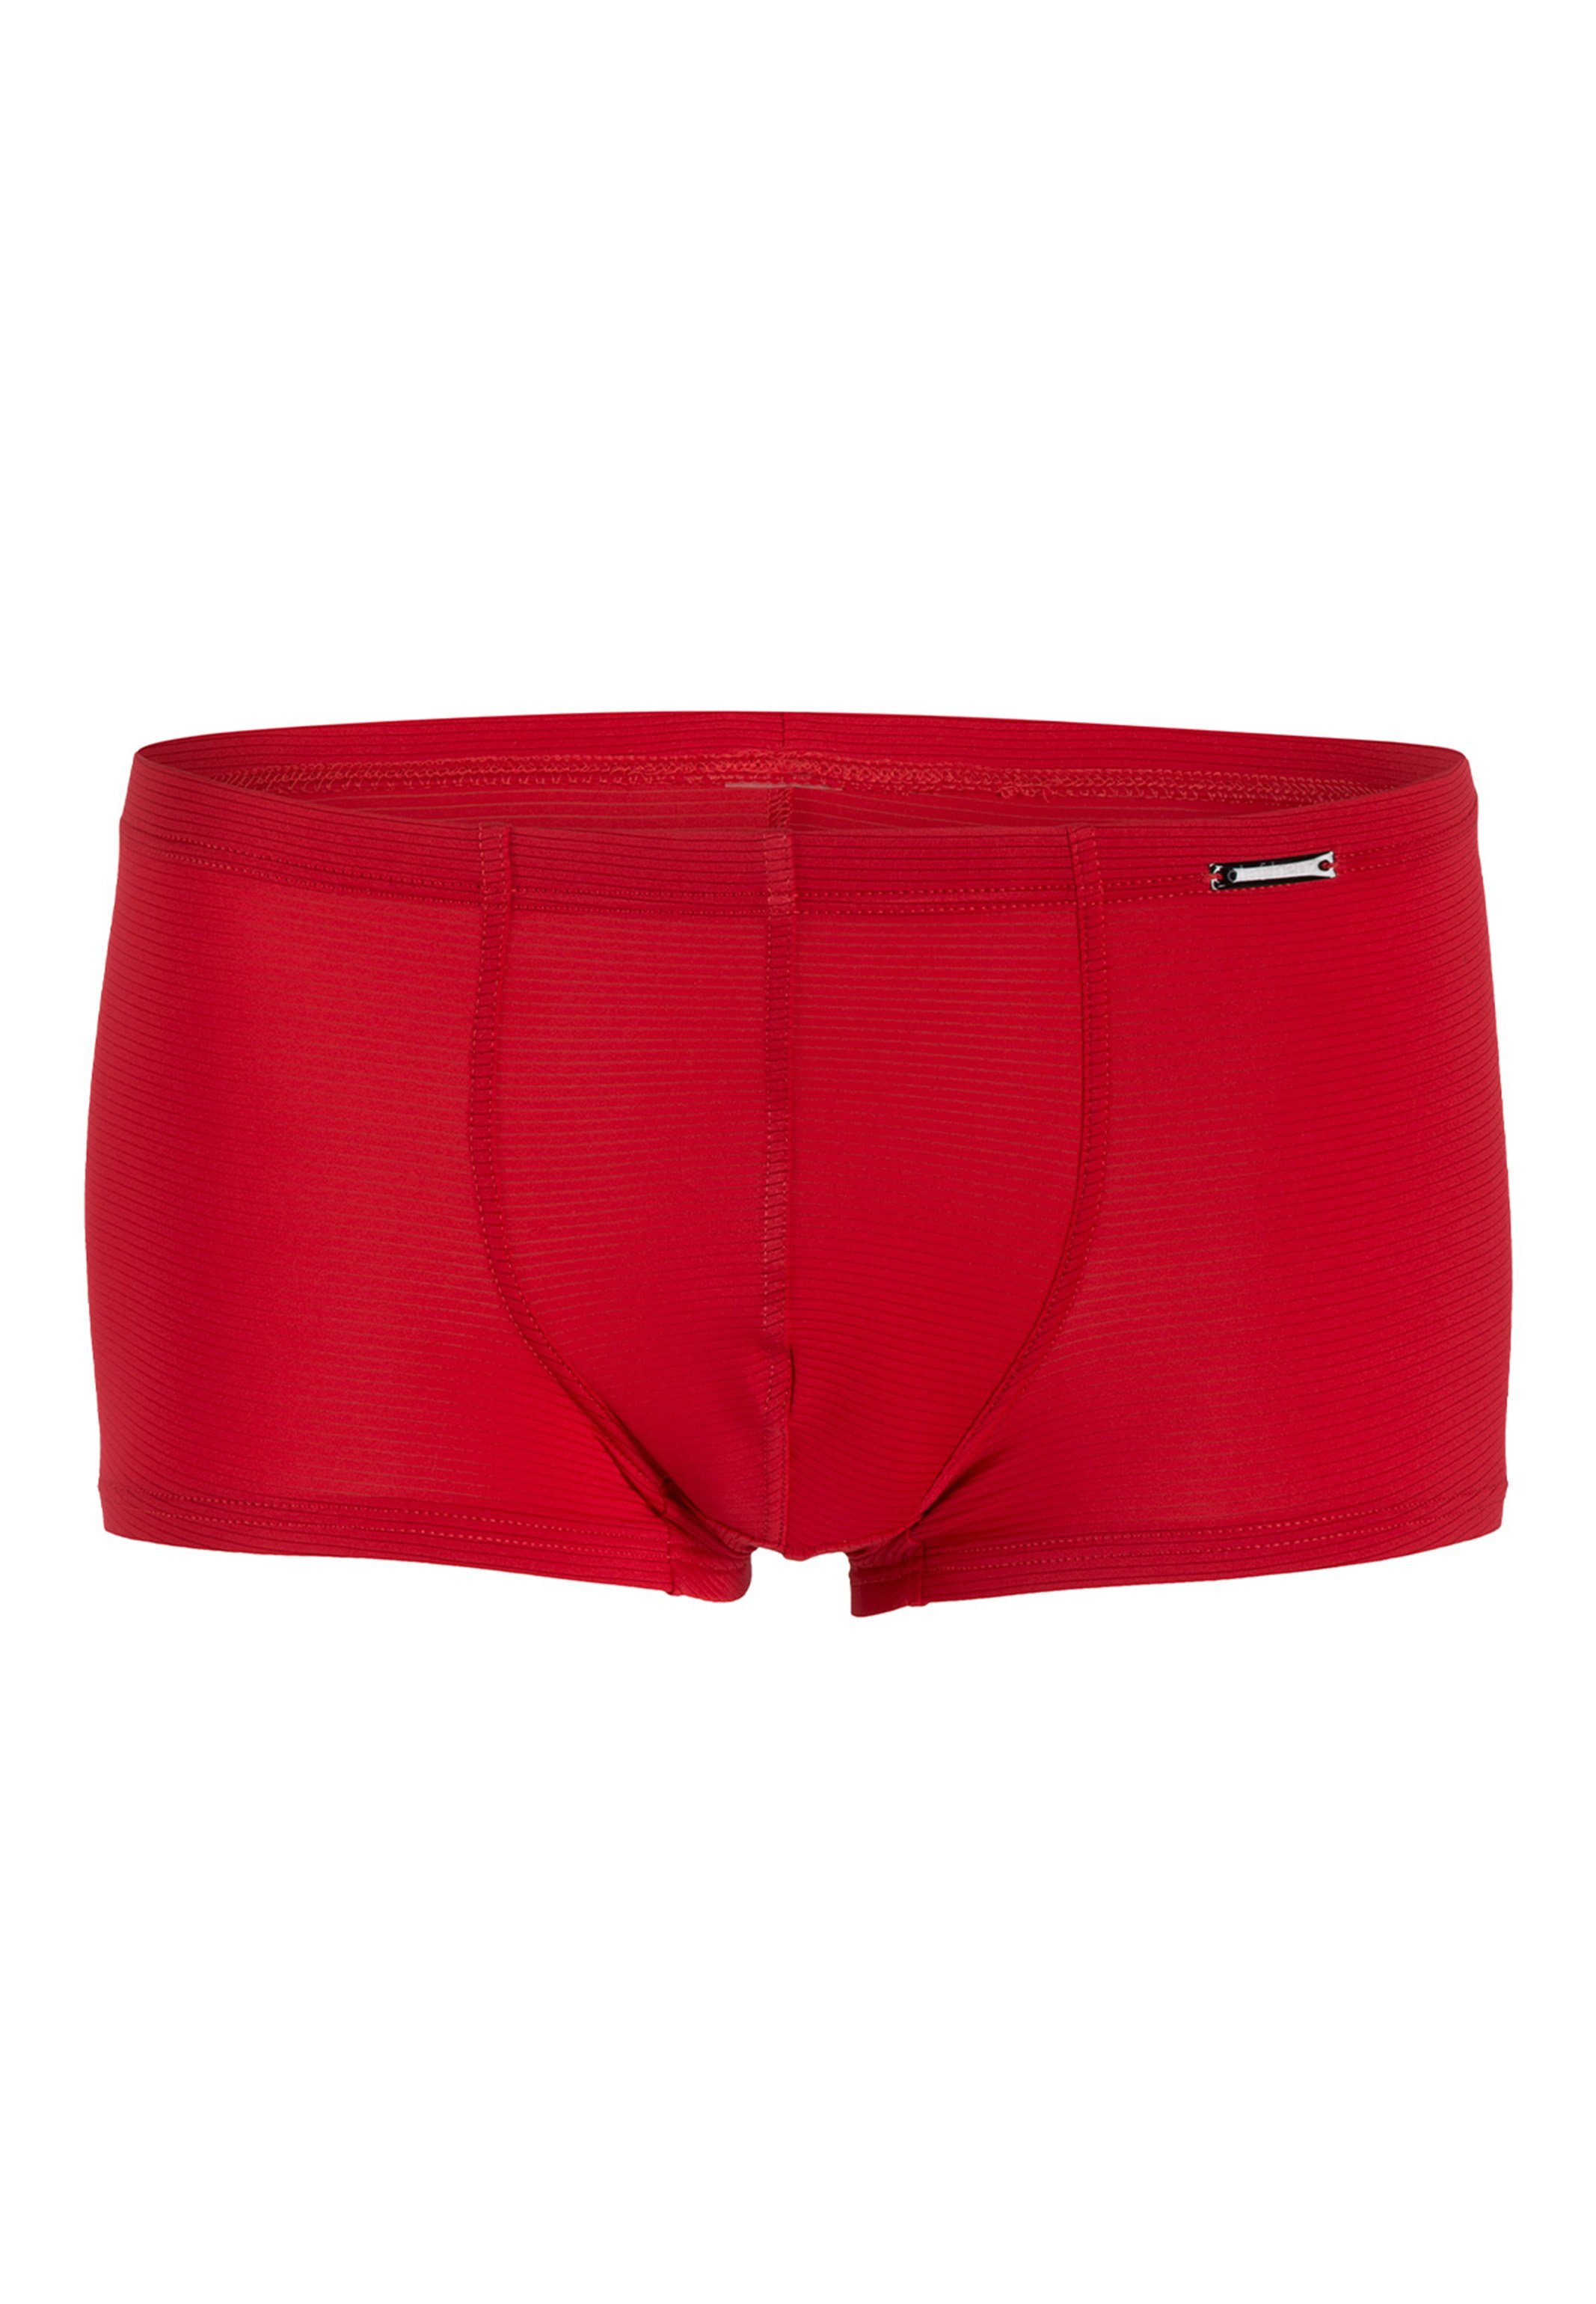 Luftige / Retro - Ohne Hipster - Rot (1-St) Eingriff Benz Mikrofaser Minipants Pant Olaf RED1201 Boxer